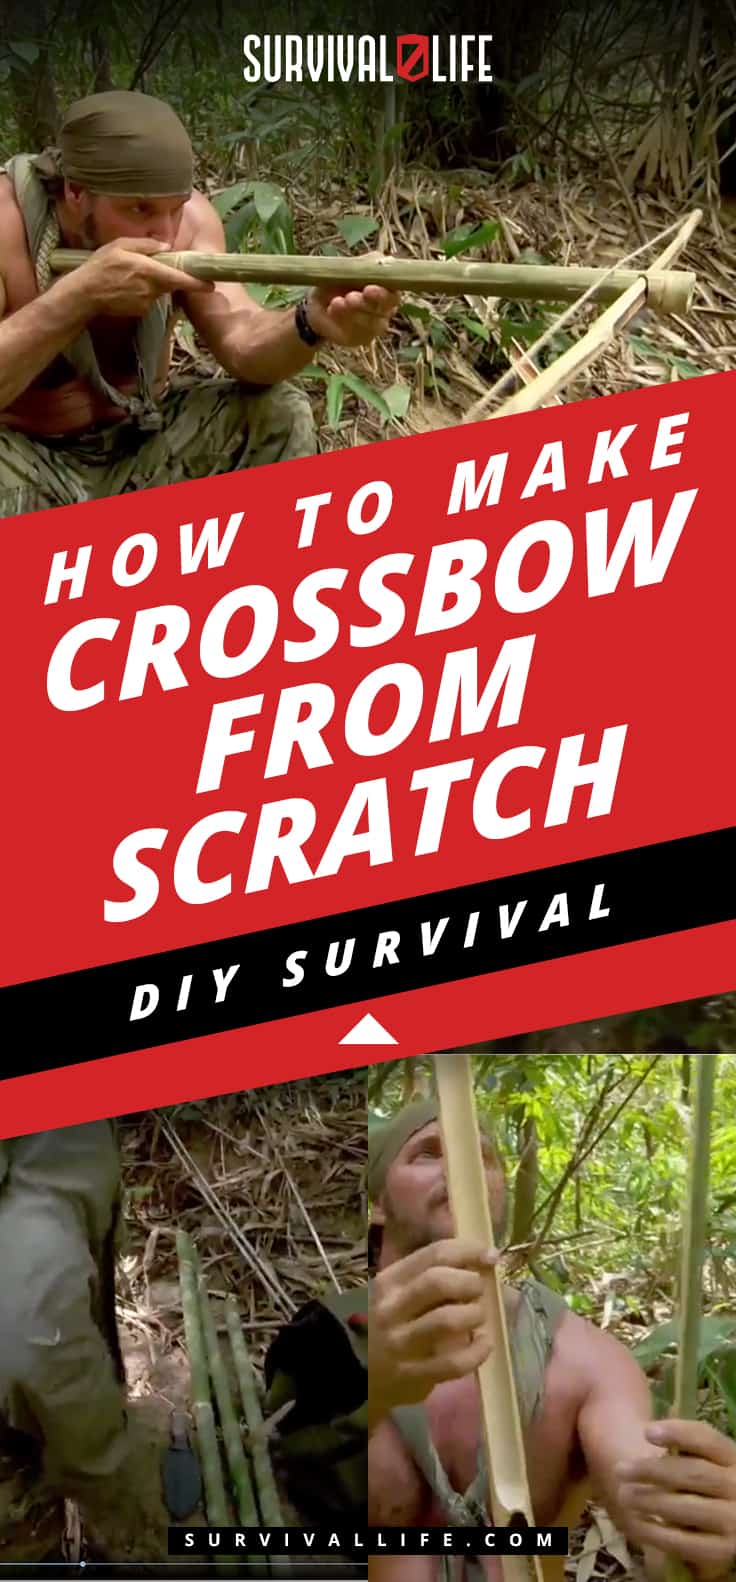 DIY Survival: How To Make A Crossbow From Scratch [Video] | https://survivallife.com/diy-survival-make-a-crossbow-from-scratch/